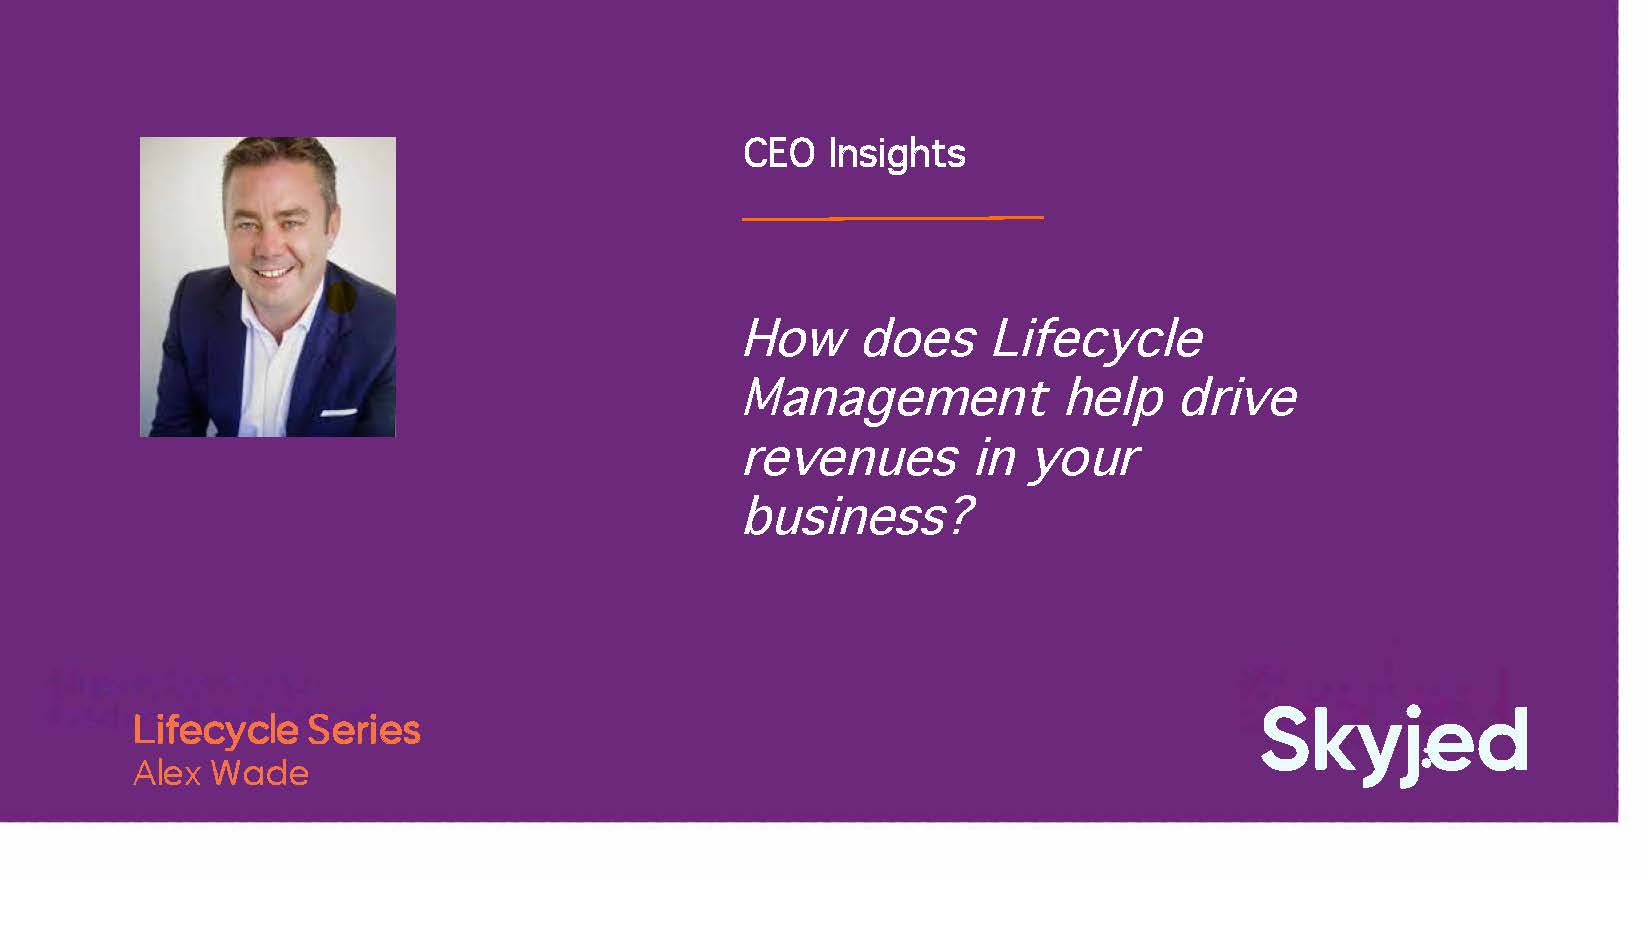 How does Lifecycle Management help drive revenues in your business?